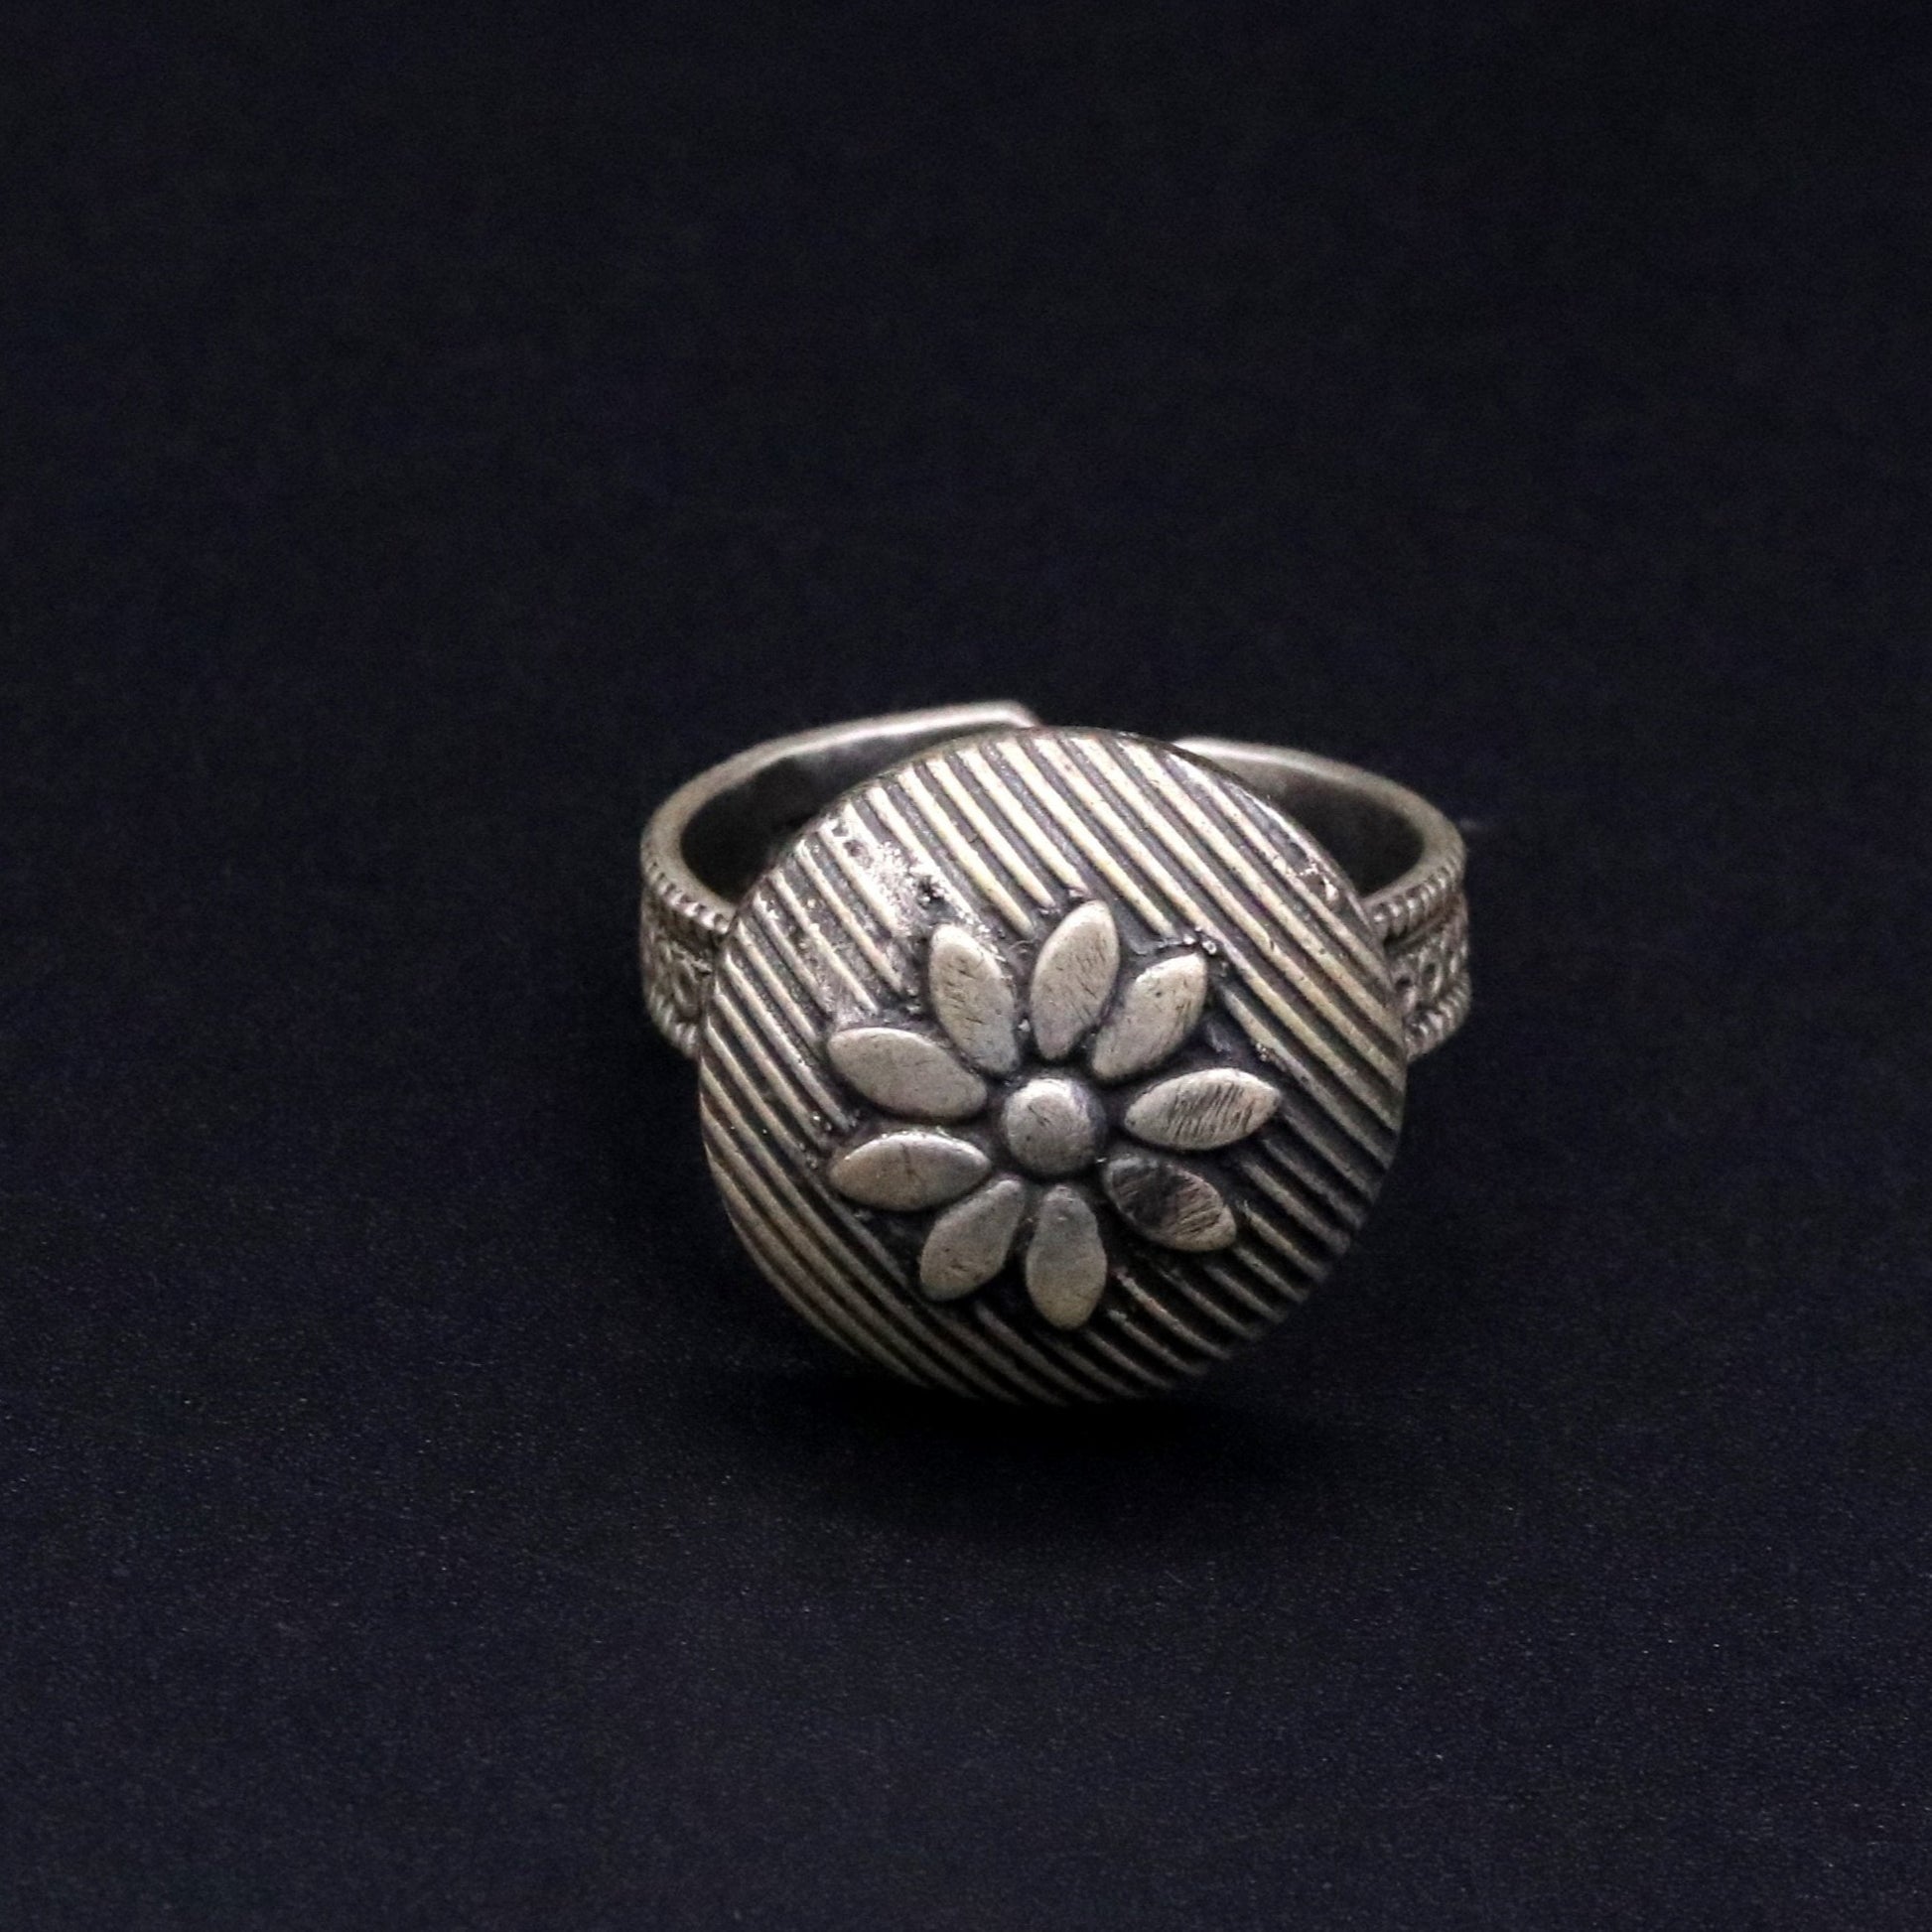 Traditional handmade silver flower shape fabulous adjustable tribal ring  jewelry from India rajasthan !!sr26 - TRIBAL ORNAMENTS